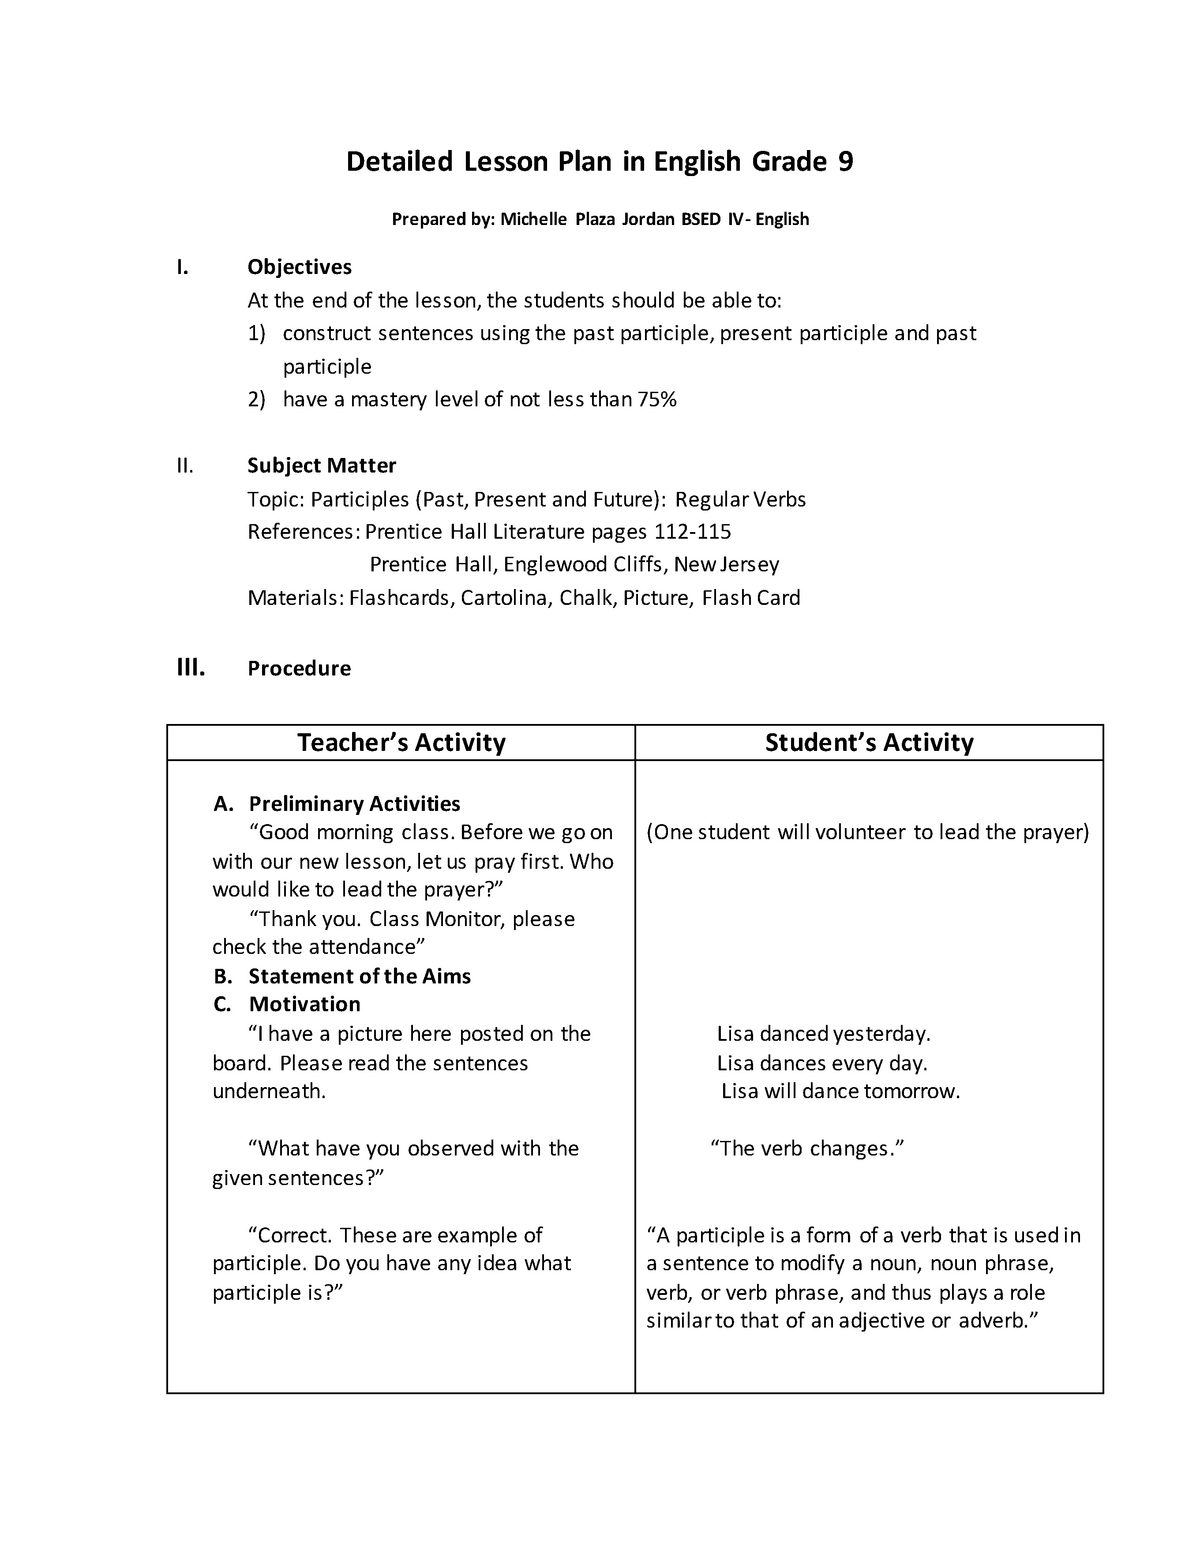 sample research based lesson plan in english